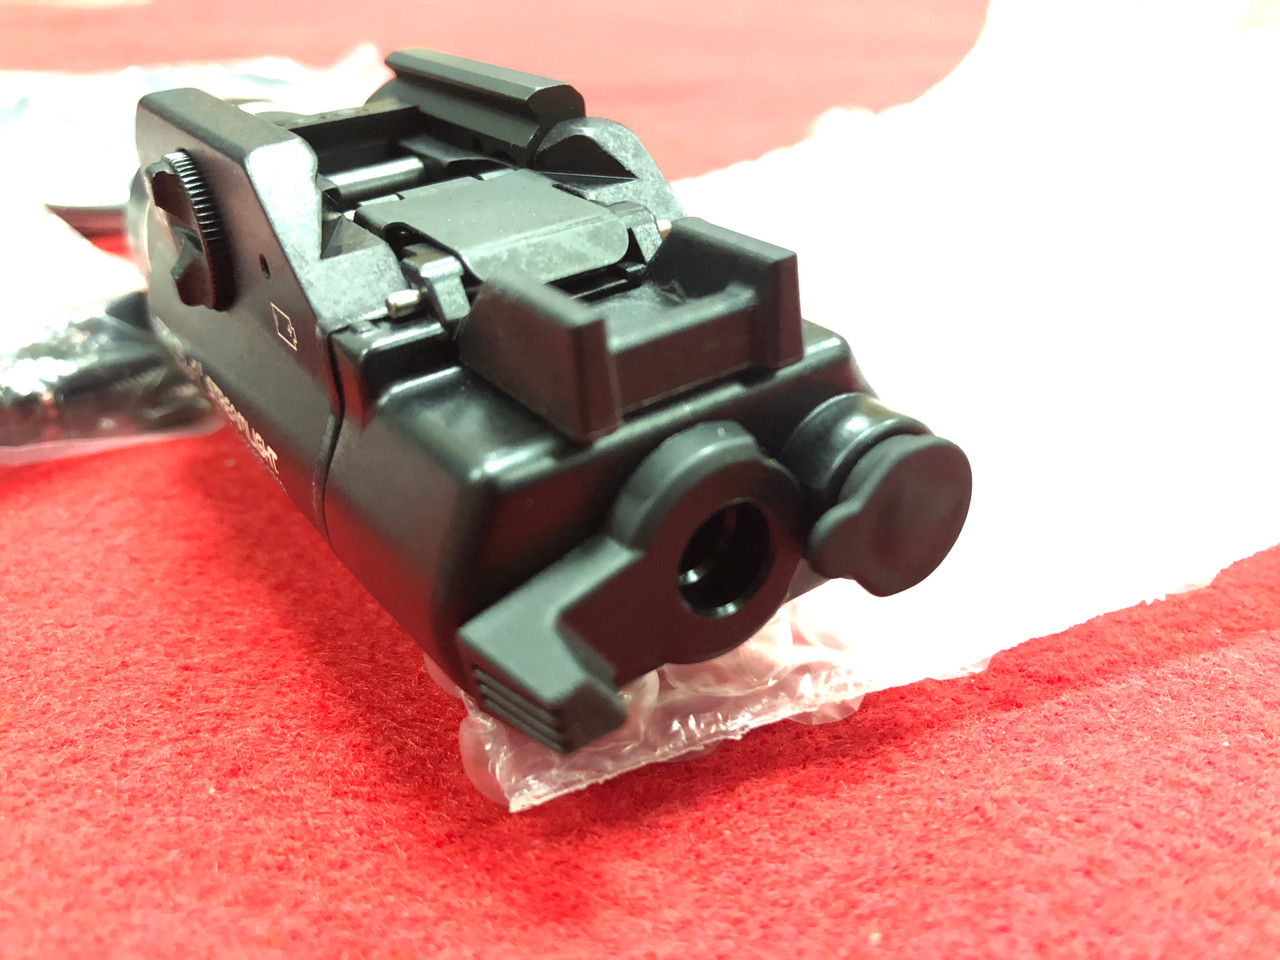 SALE: STREAMLIGHT TLR-1 Kit with Remote Switch 